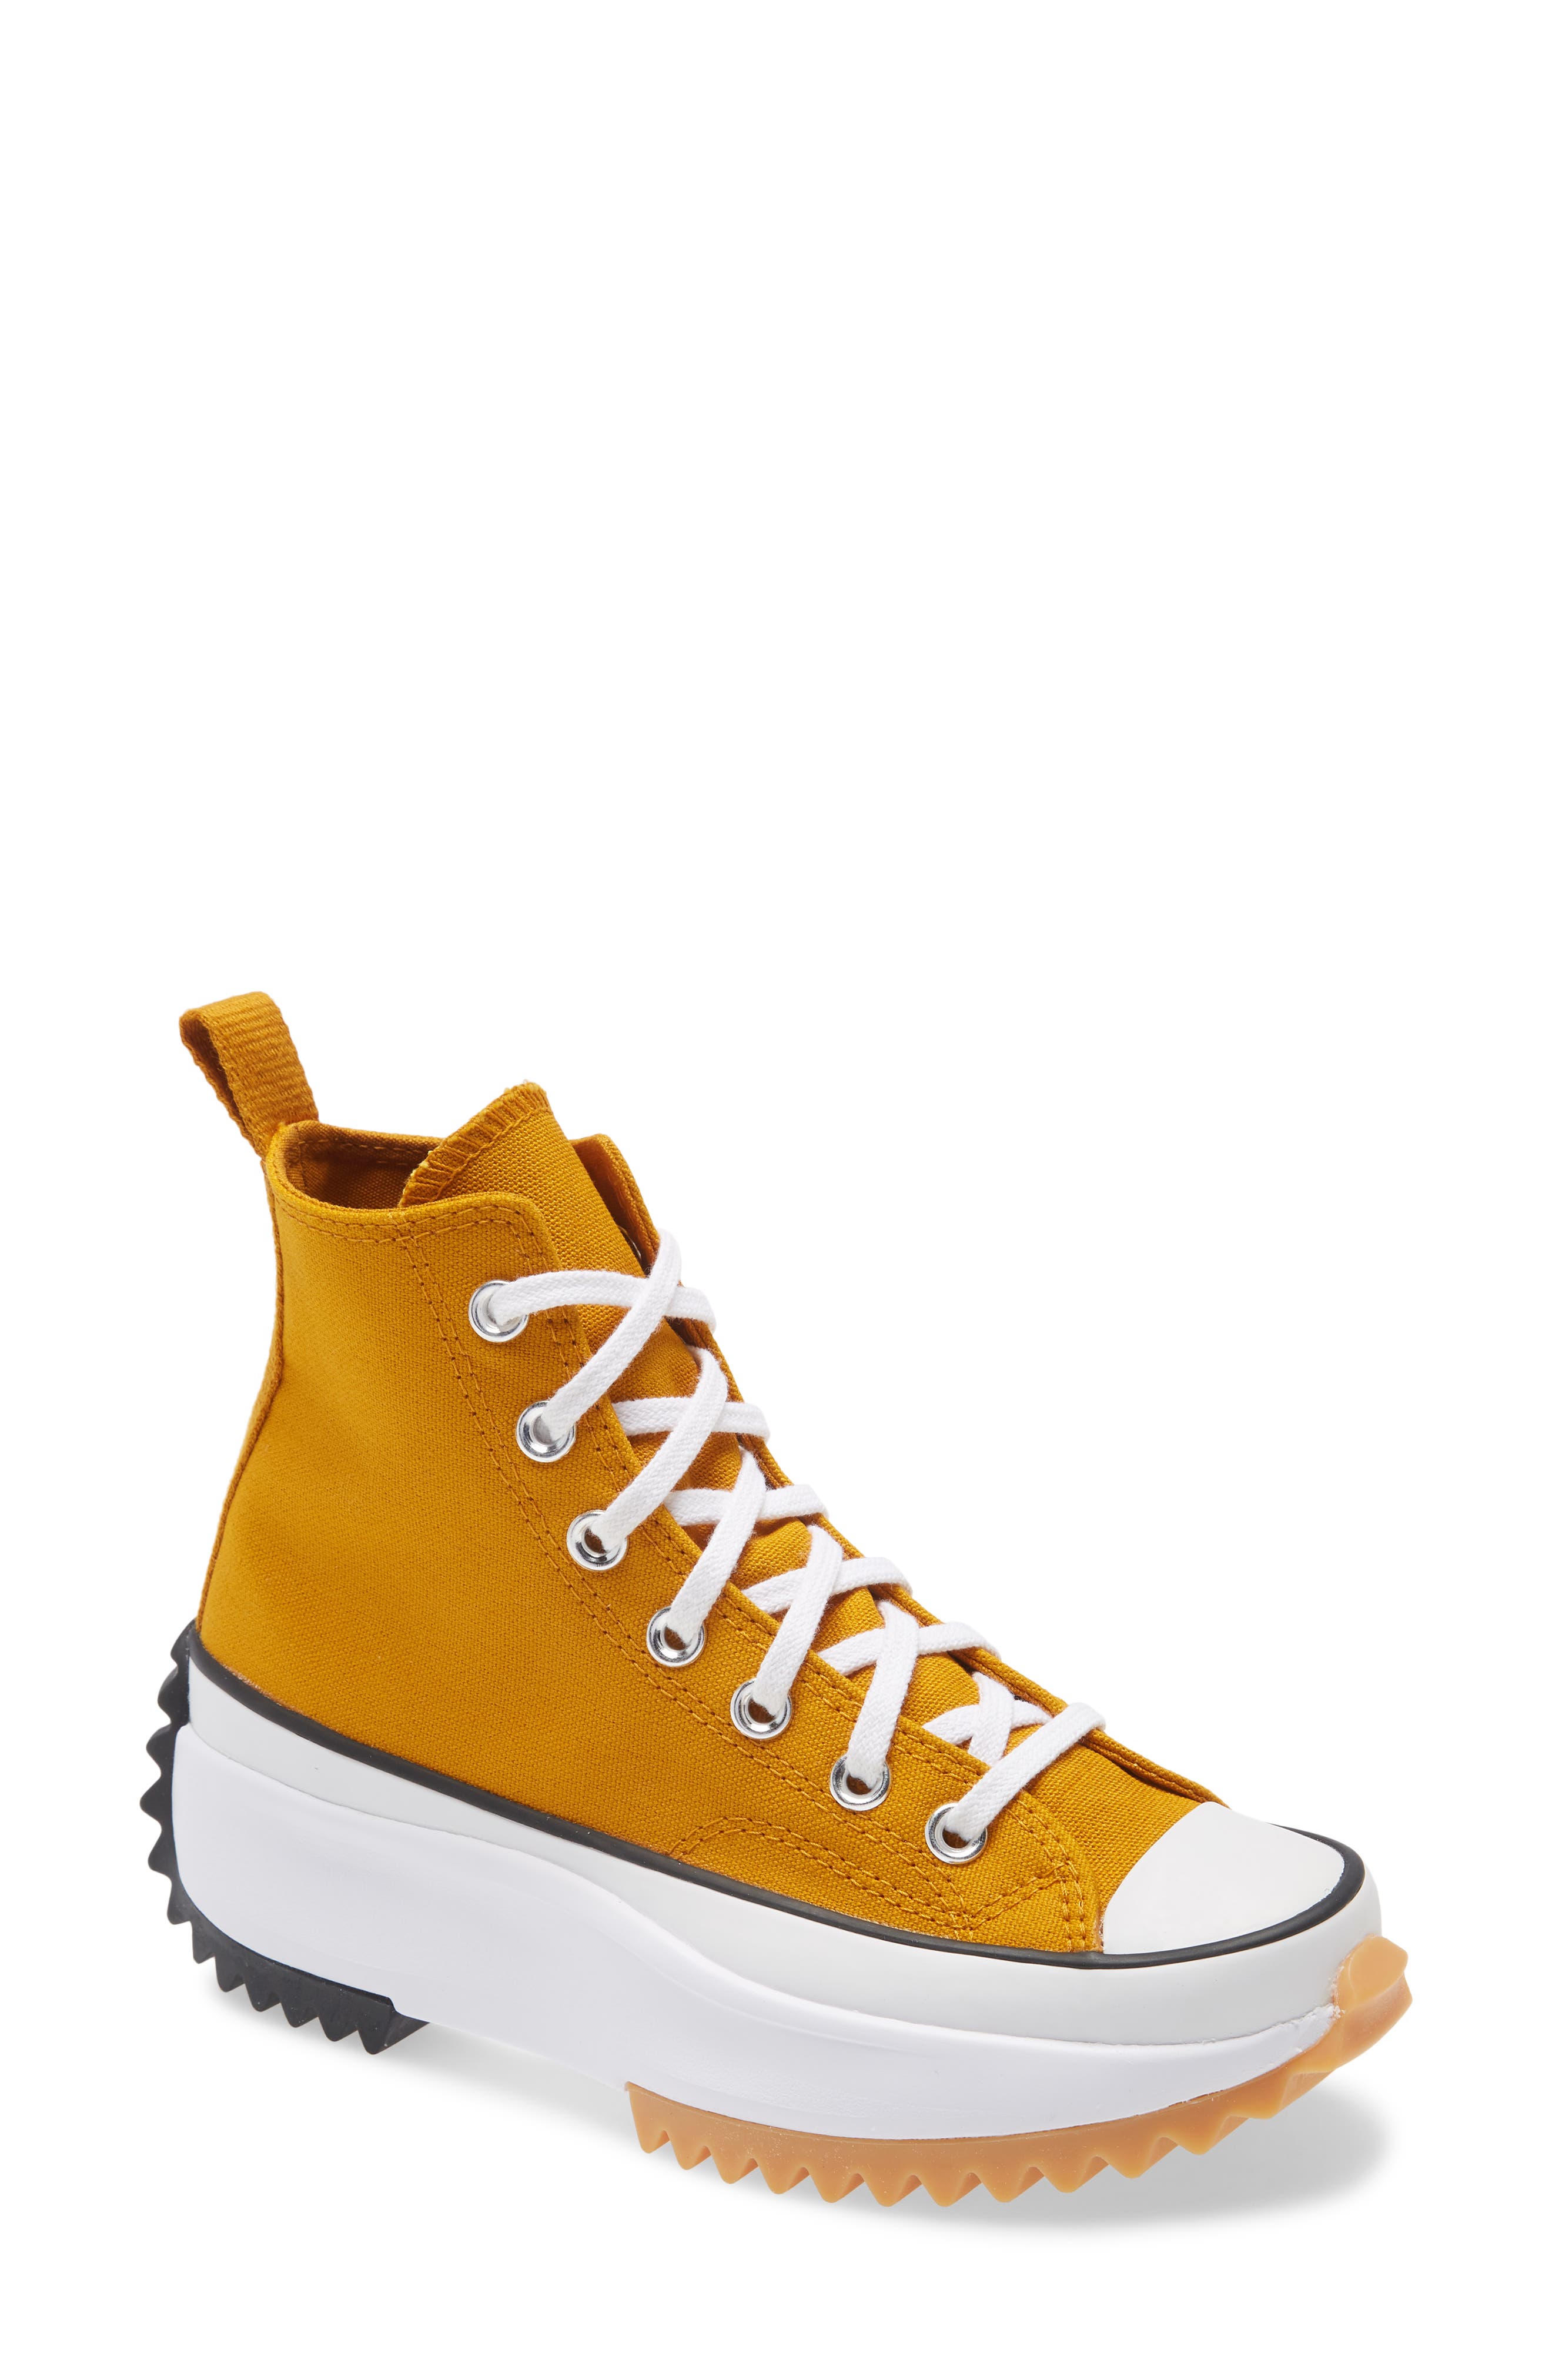 high top yellow sneakers